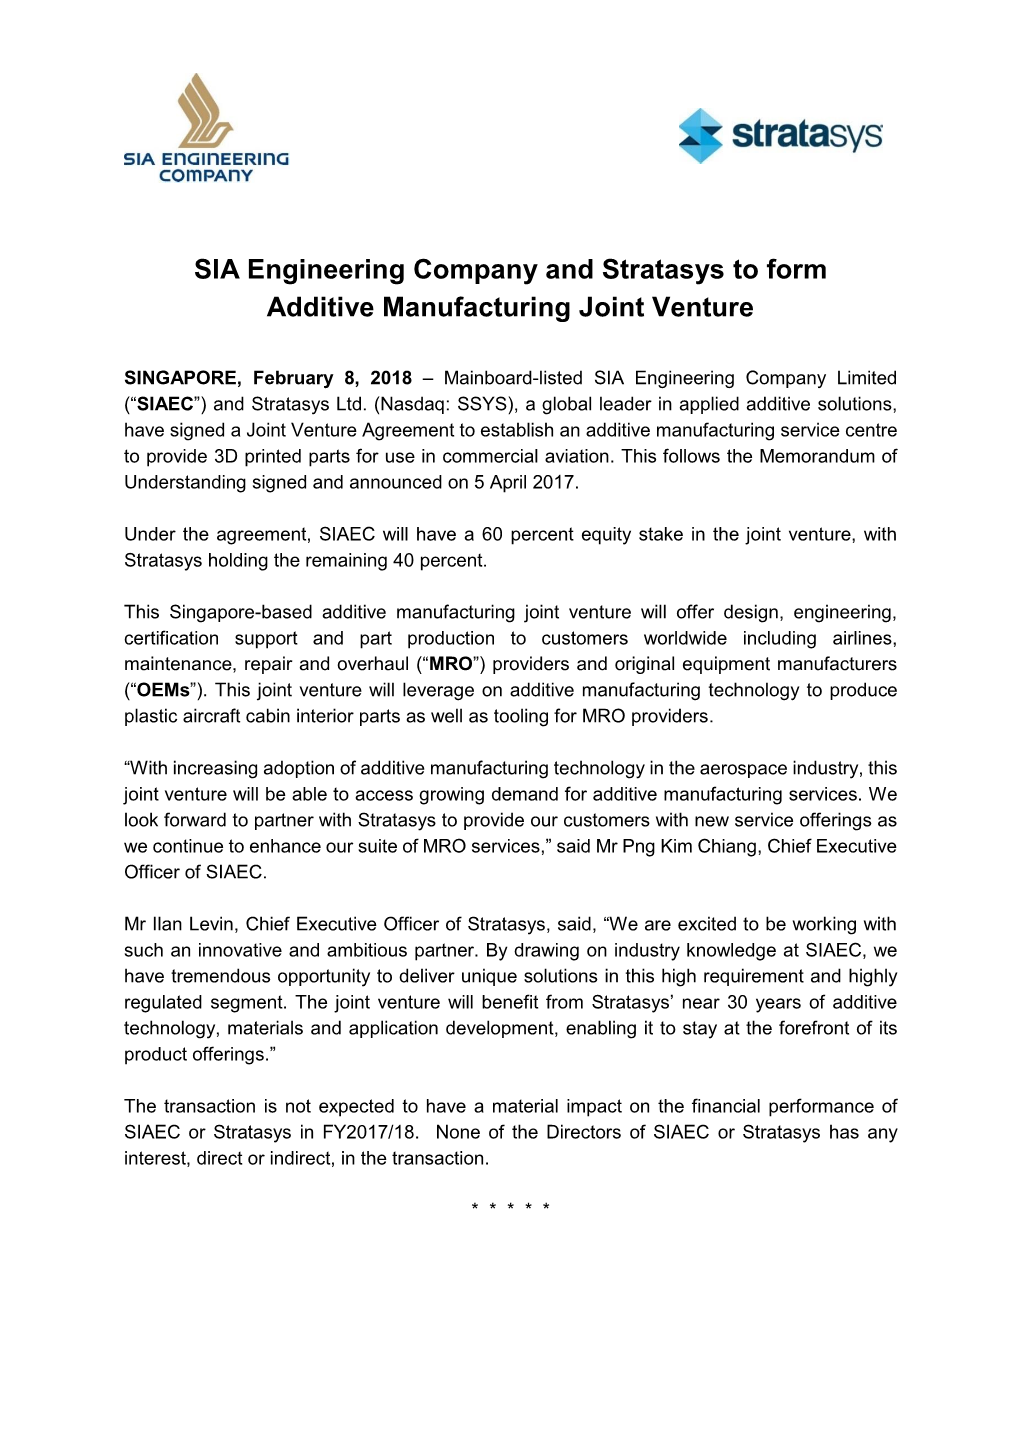 SIA Engineering Company and Stratasys to Form Additive Manufacturing Joint Venture